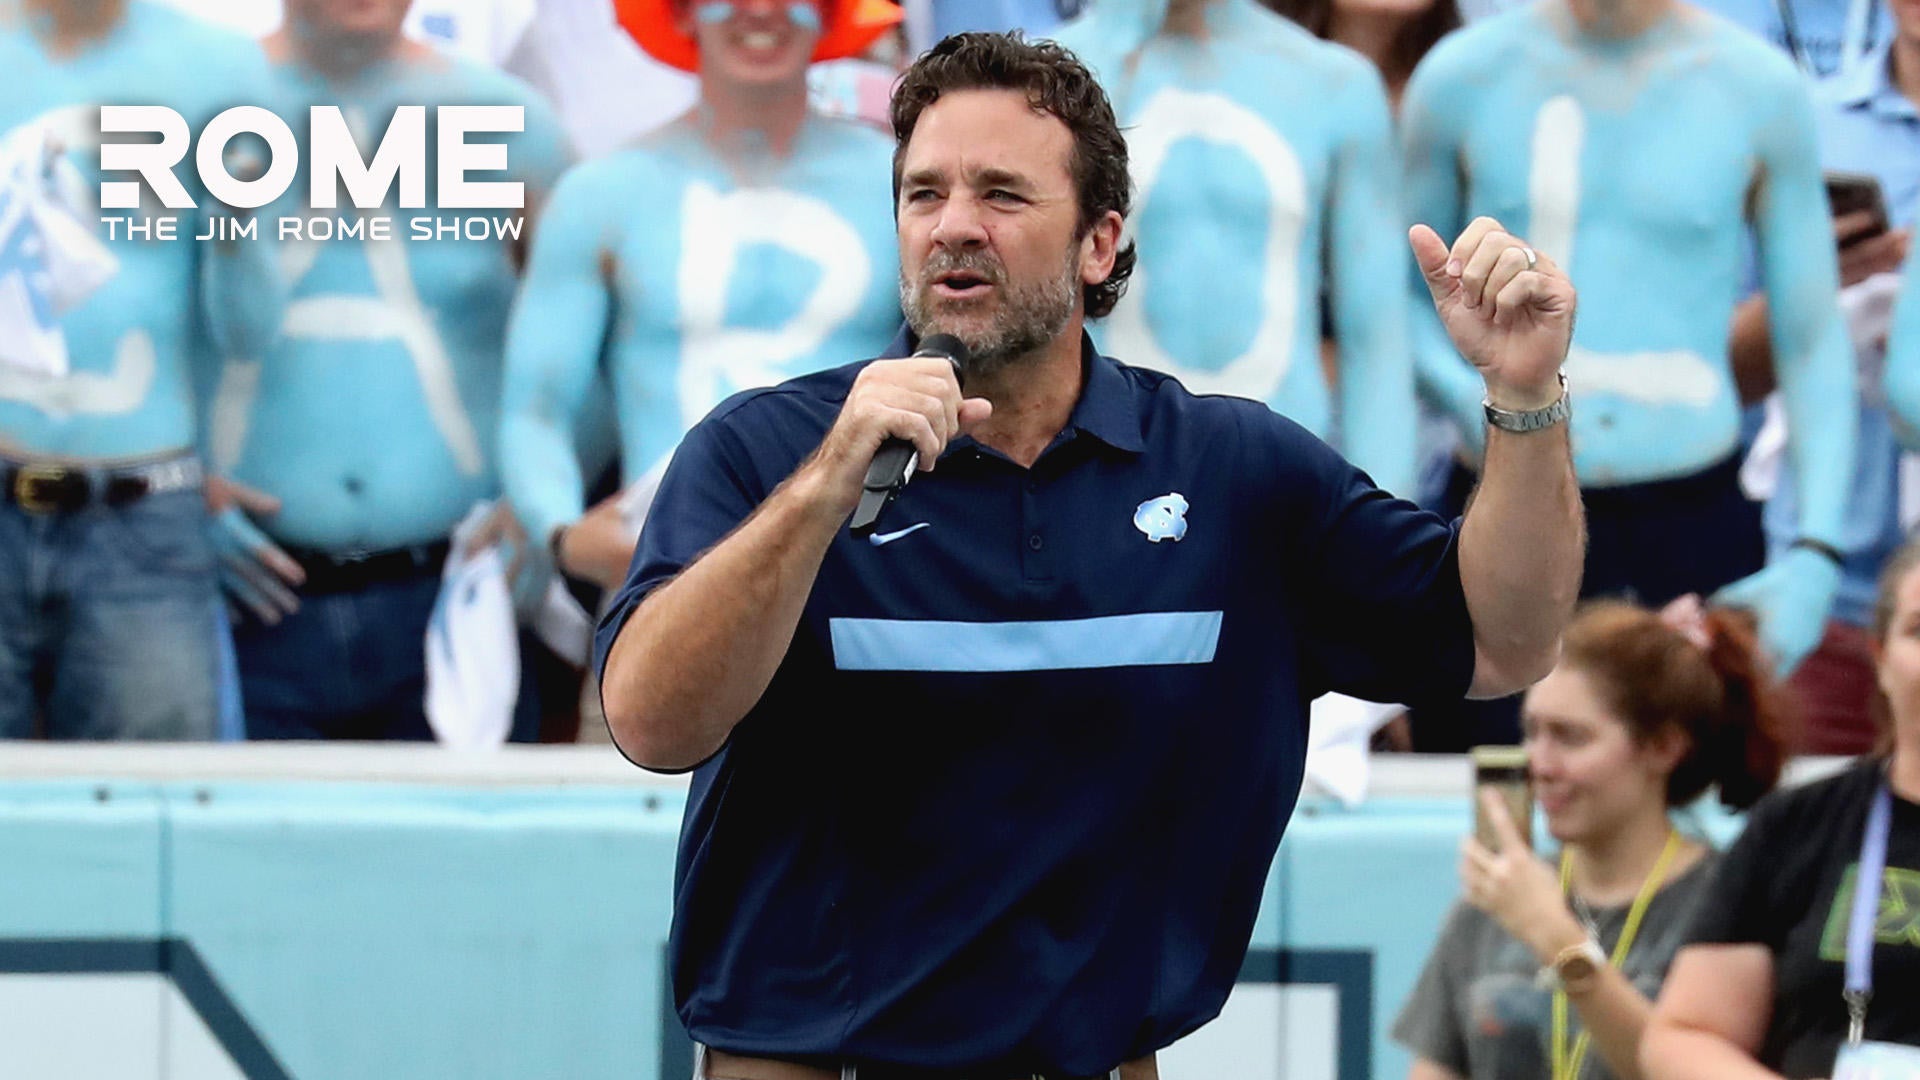 The Jim Rome Show: Will Brinson on the Bizarre Hiring of Jeff